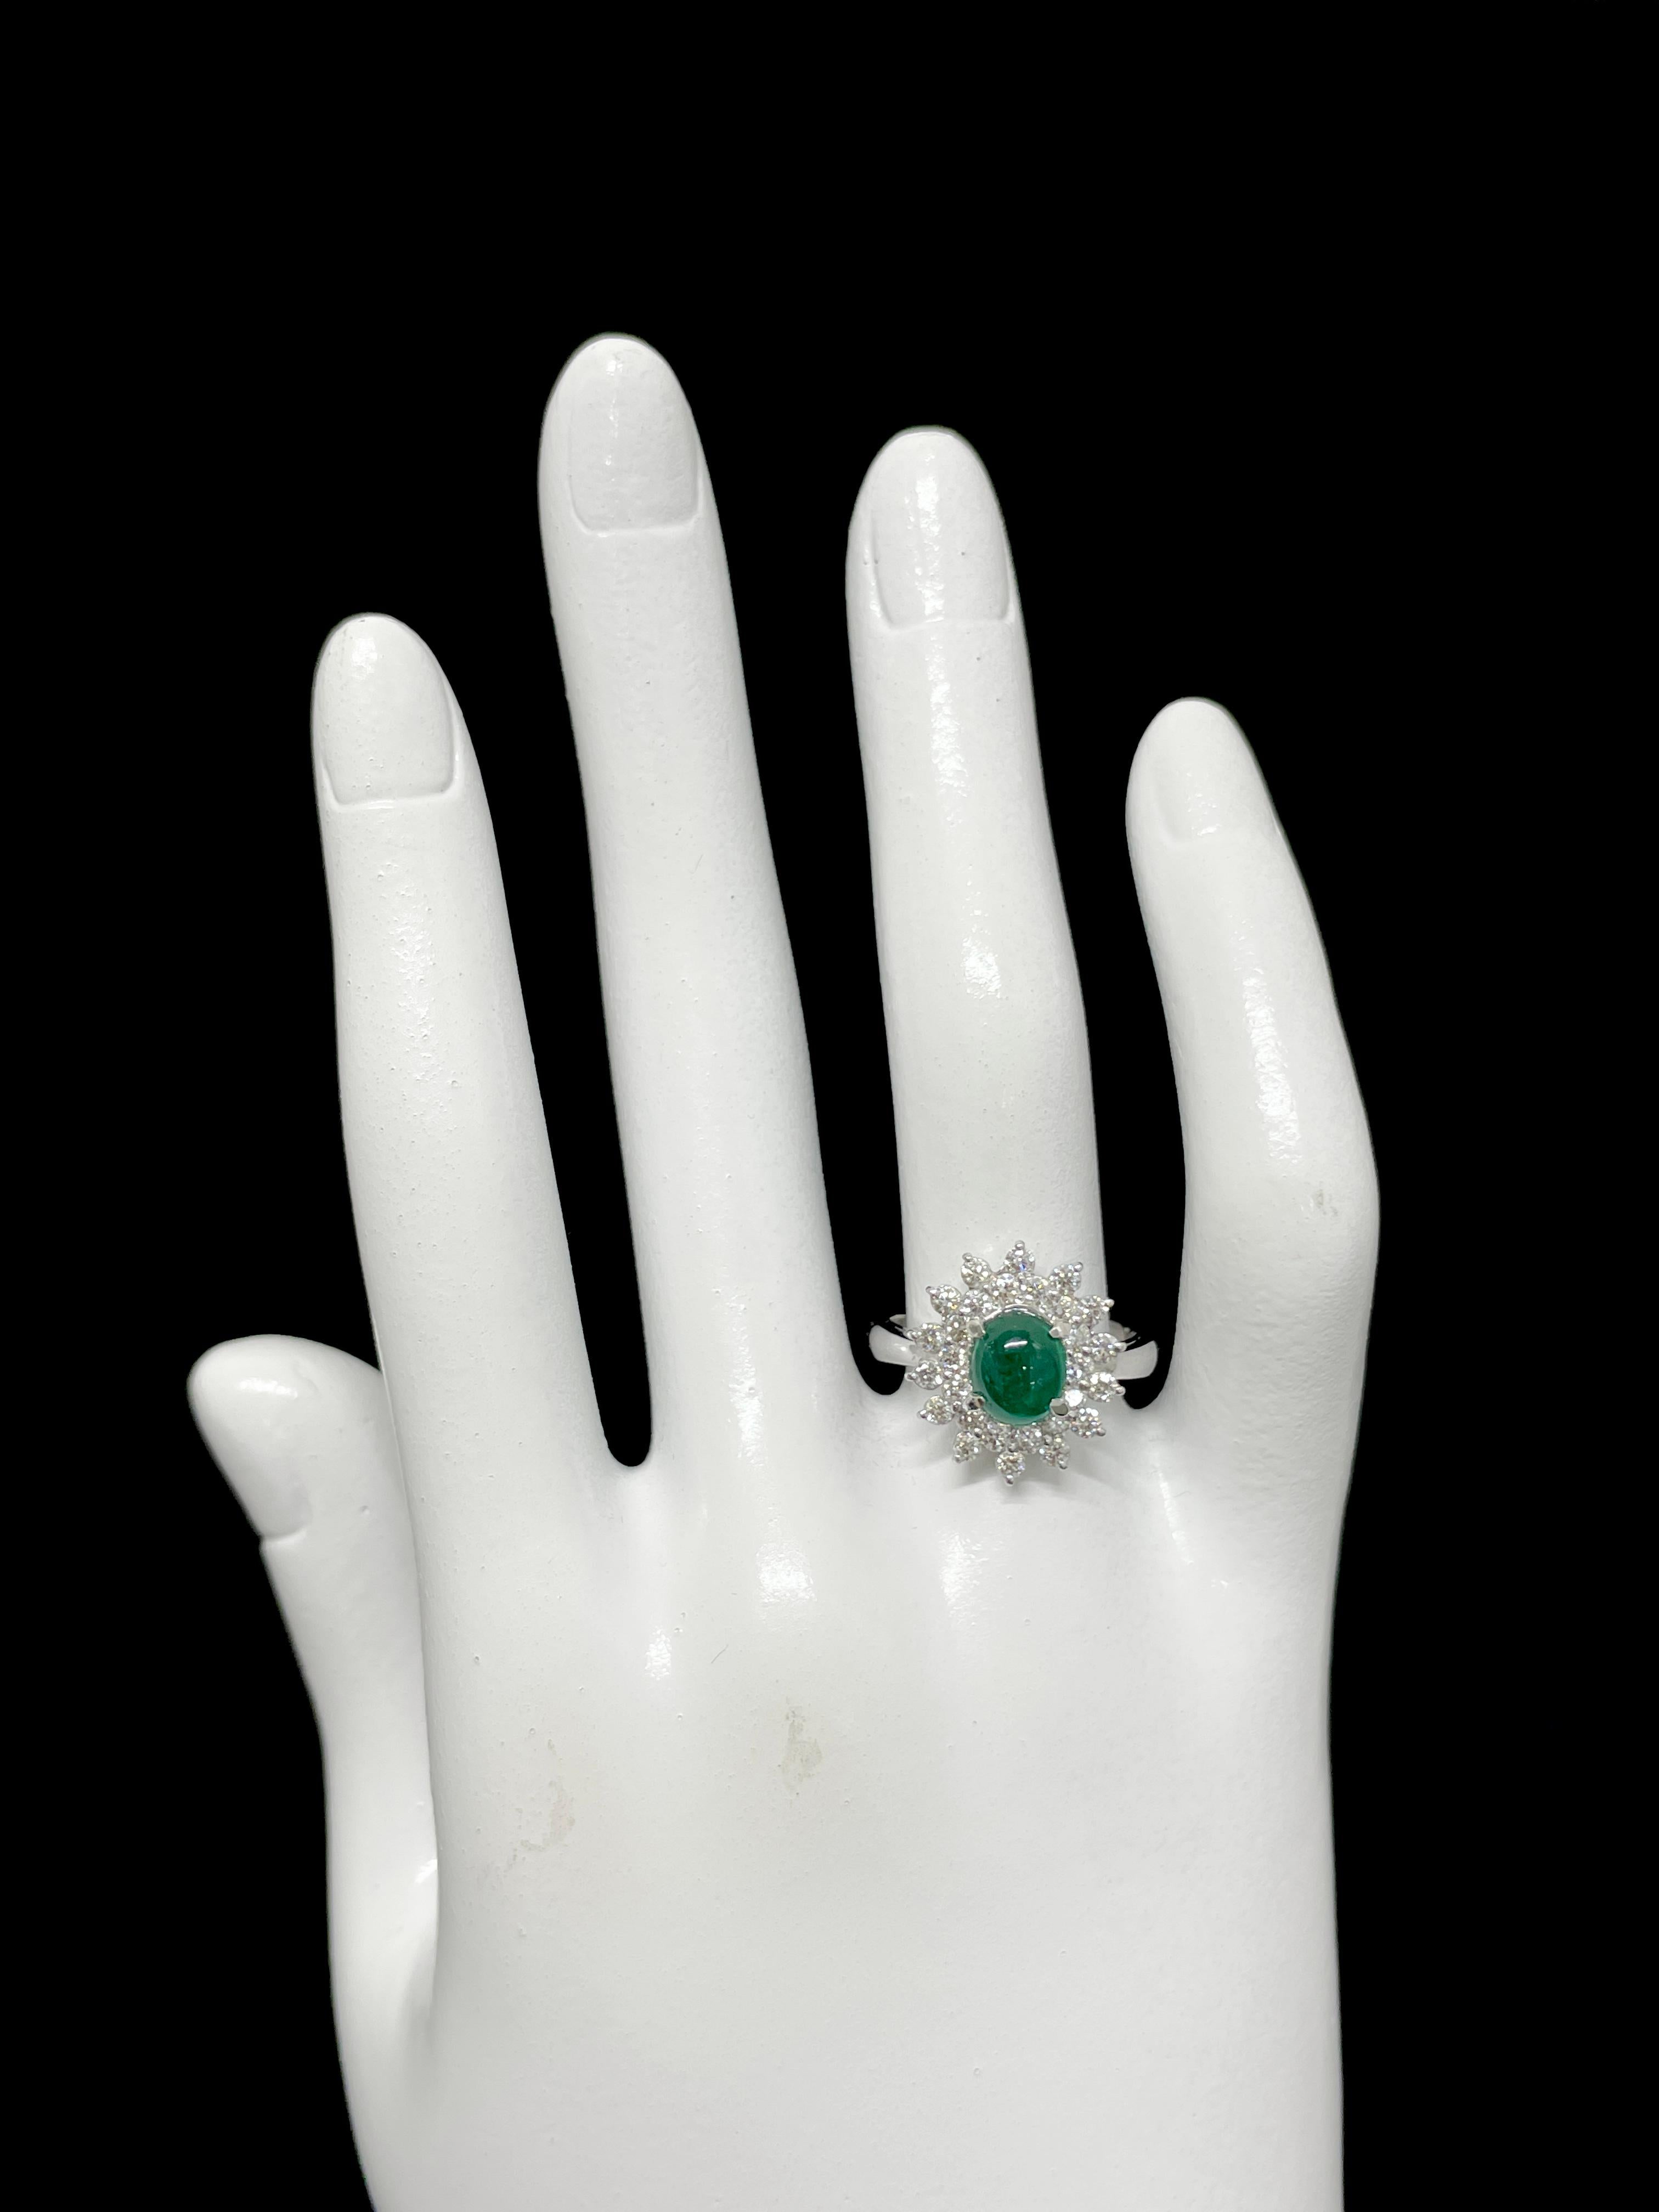 1.17 Carat Natural Emerald Cabochon and Diamond Ring Set in Platinum For Sale 2